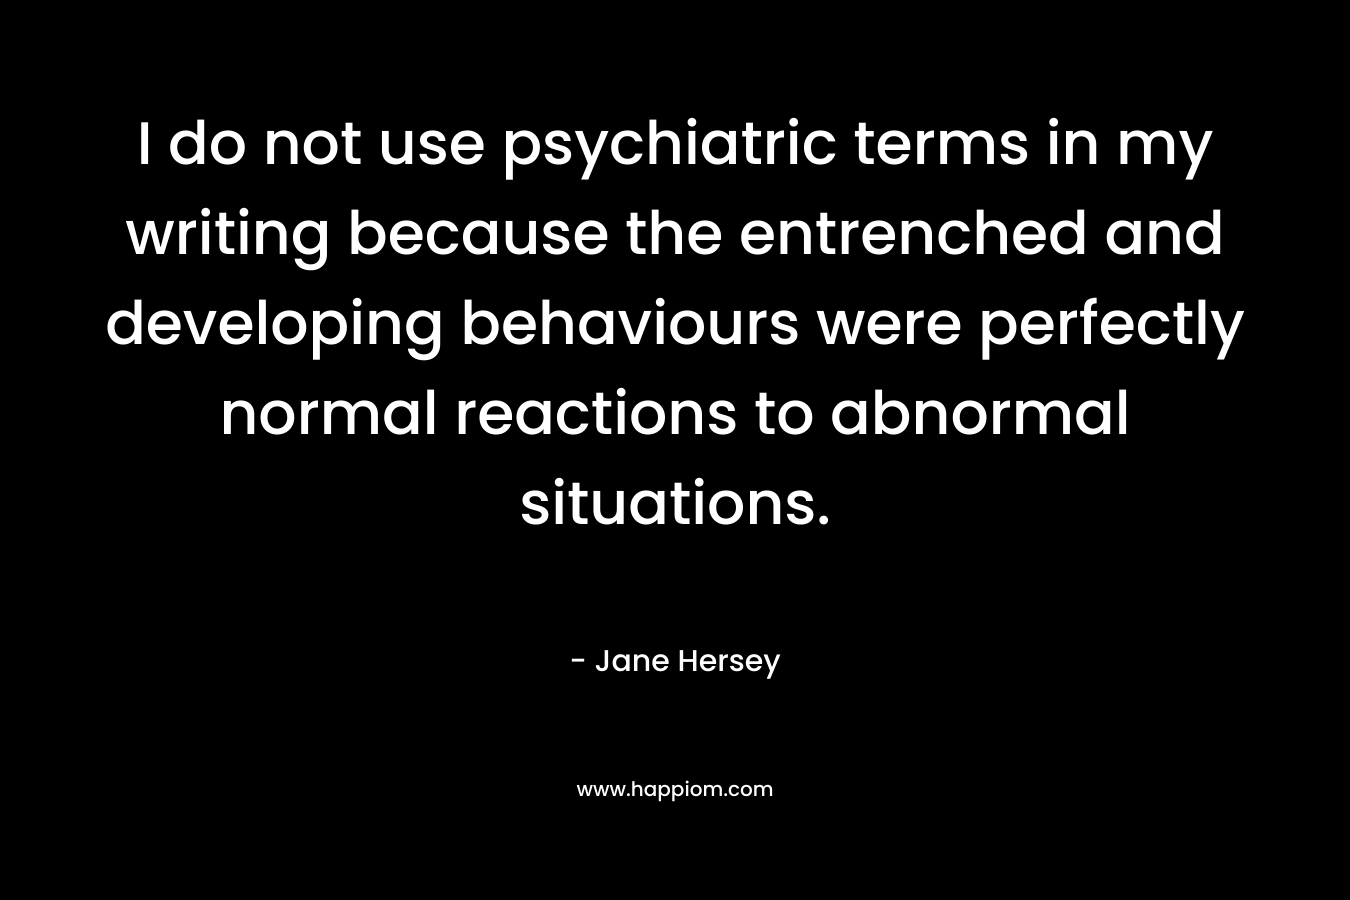 I do not use psychiatric terms in my writing because the entrenched and developing behaviours were perfectly normal reactions to abnormal situations.